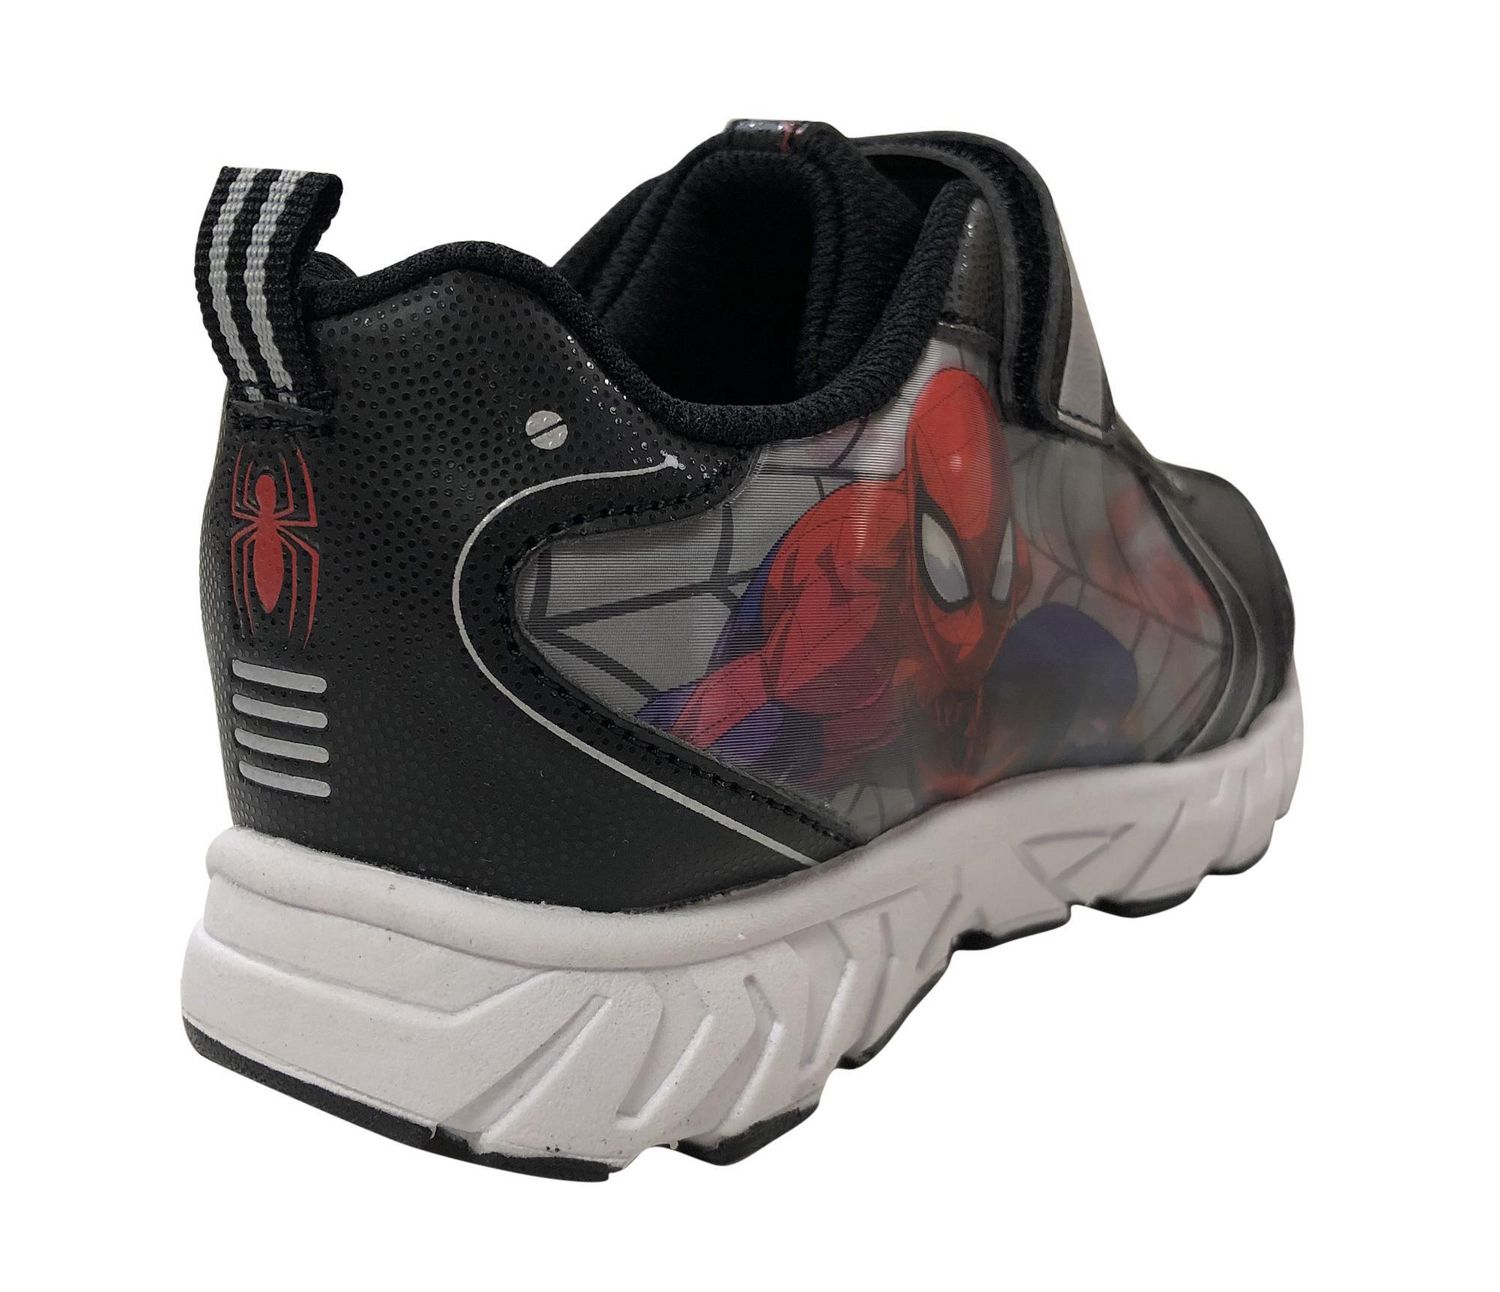 Spider-Man Marvel Lighted Boys' s Athletic Shoes, Available in Sizes: 11-3  